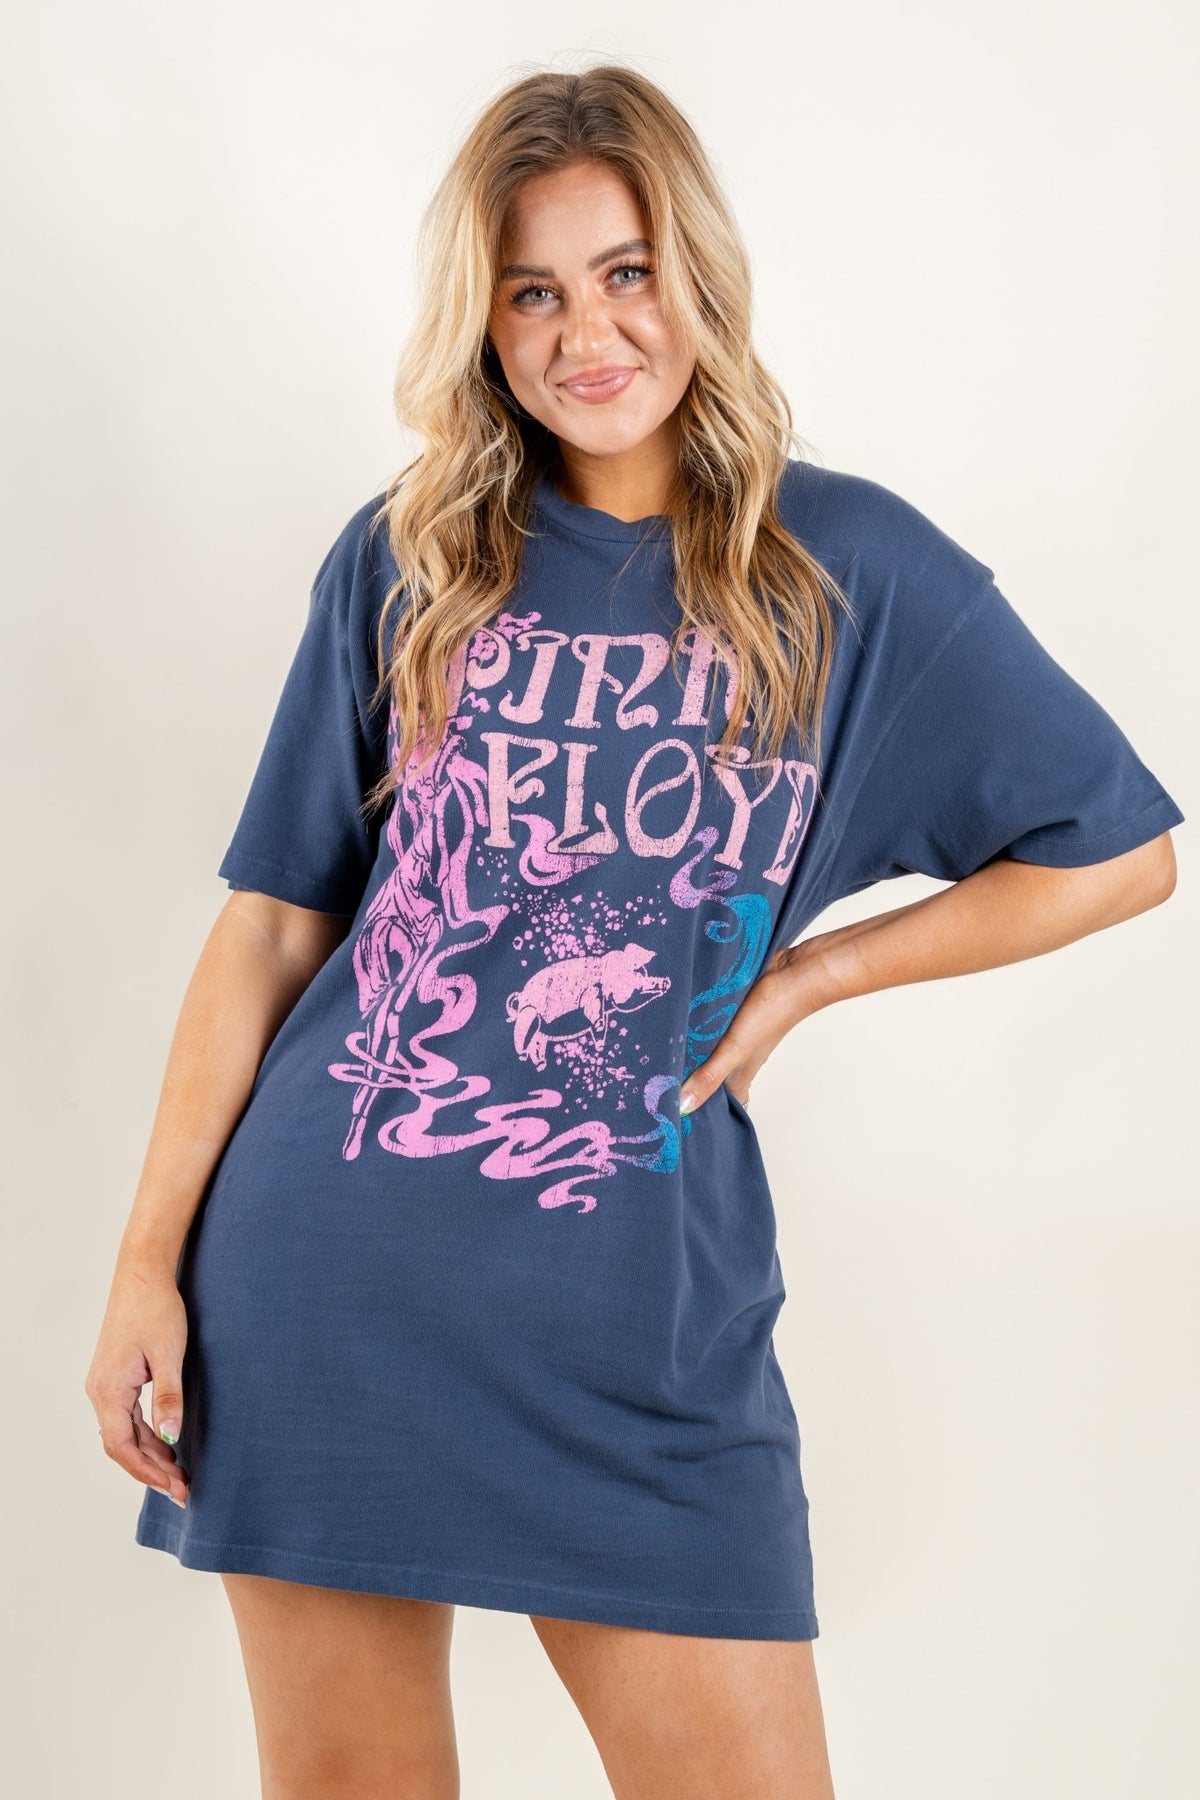 DayDreamer Pink Floyd t-shirt dress navy - DayDreamer Graphic Band Tees at Lush Fashion Lounge Trendy Boutique in Oklahoma City